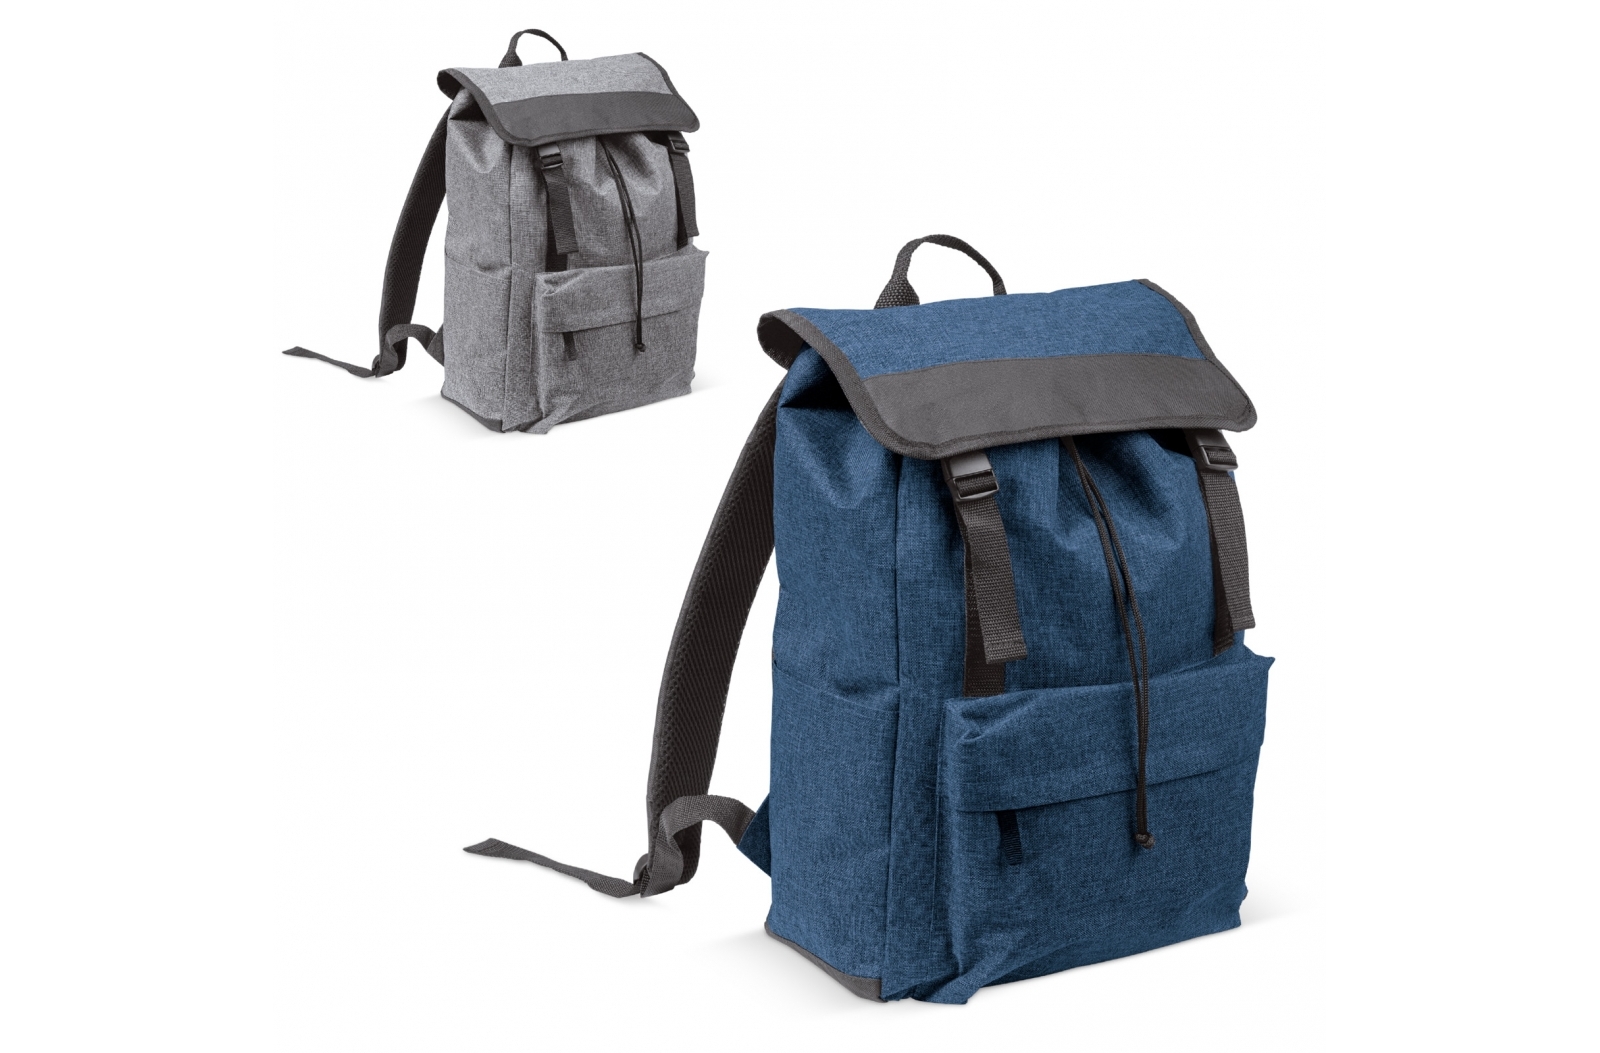 A stylish formal backpack that features a front pocket with a zipper and a side pocket for holding a bottle - Wyke Regis